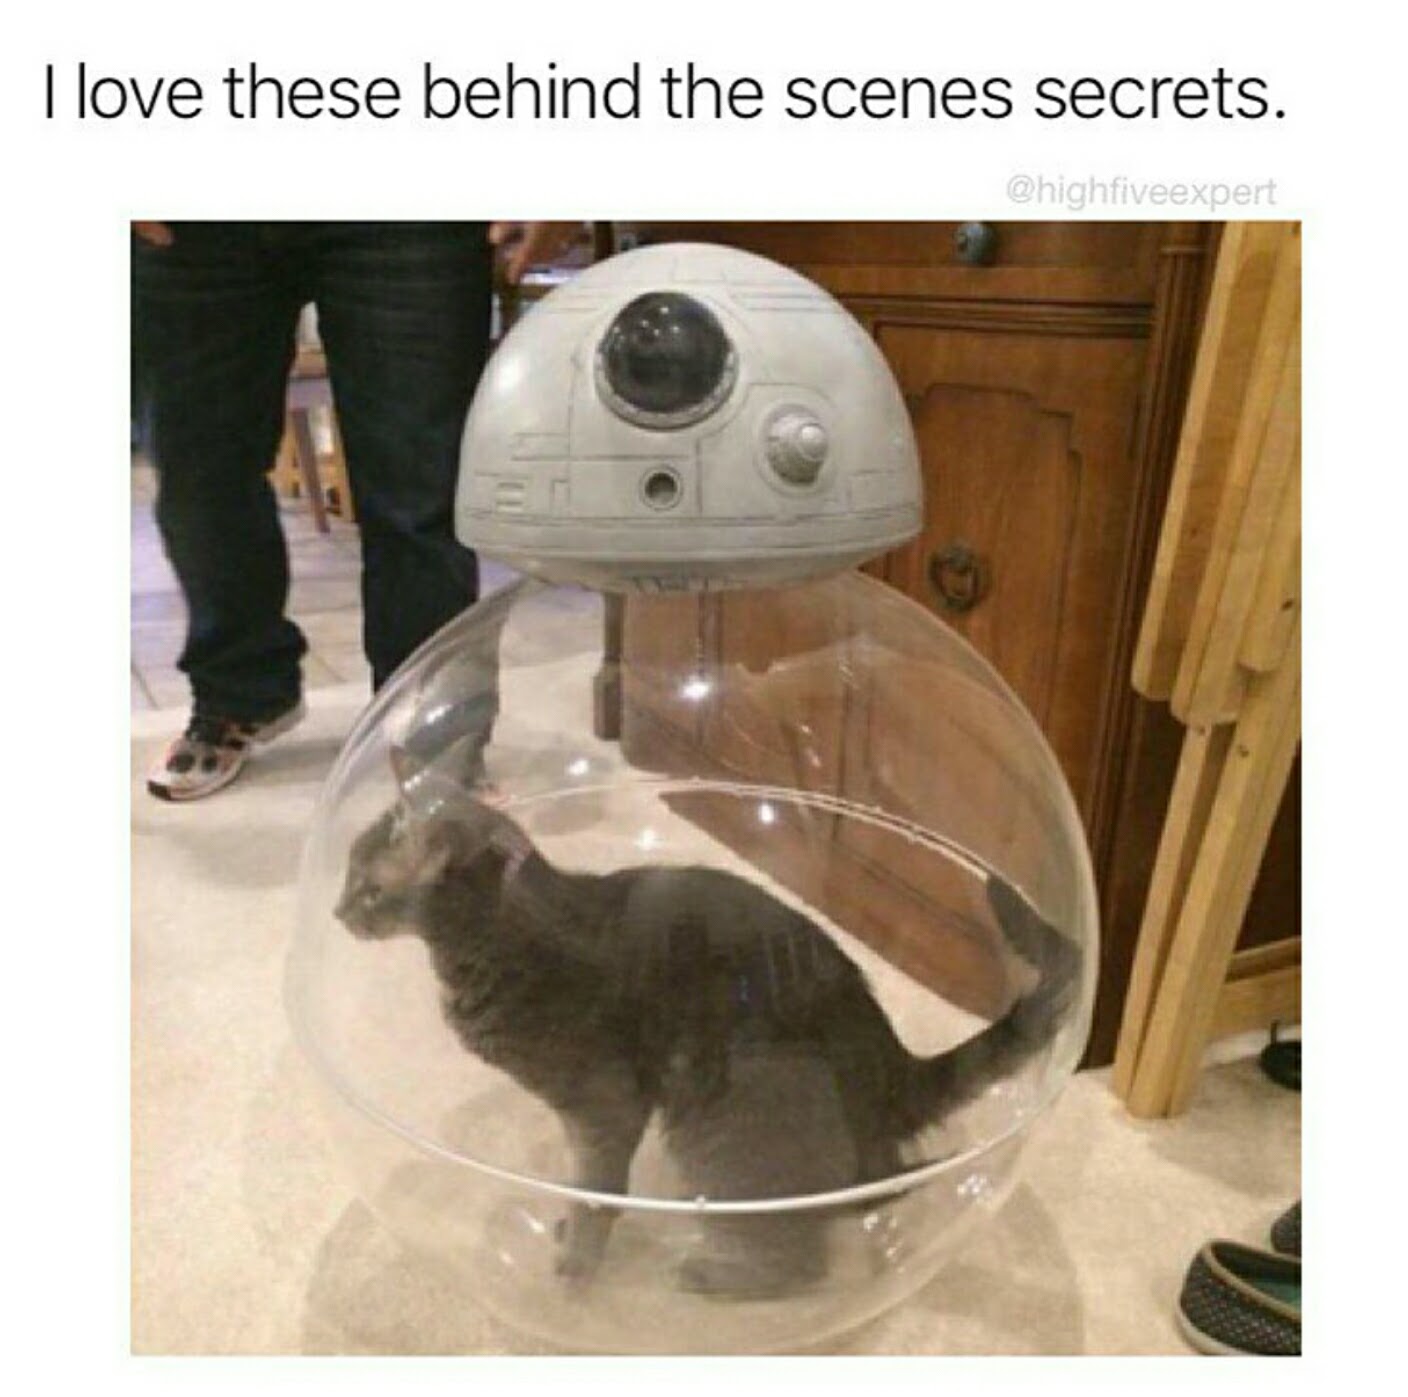 bb 8 really works - I love these behind the scenes secrets.